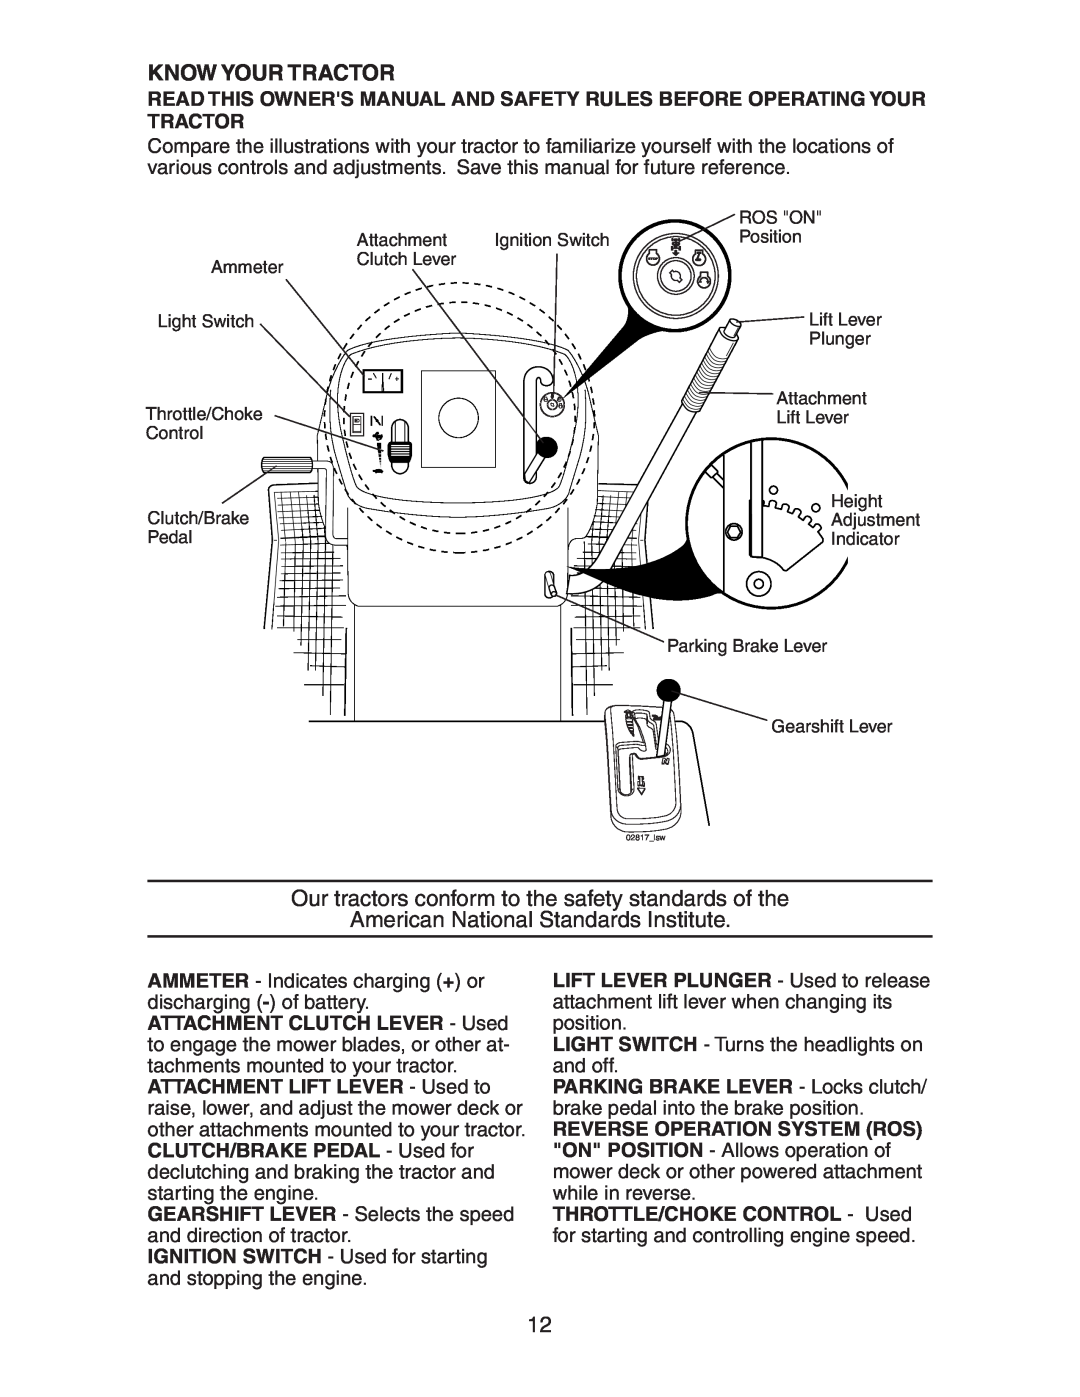 Craftsman 917.27581 owner manual Know Your Tractor, Our tractors conform to the safety standards of the 